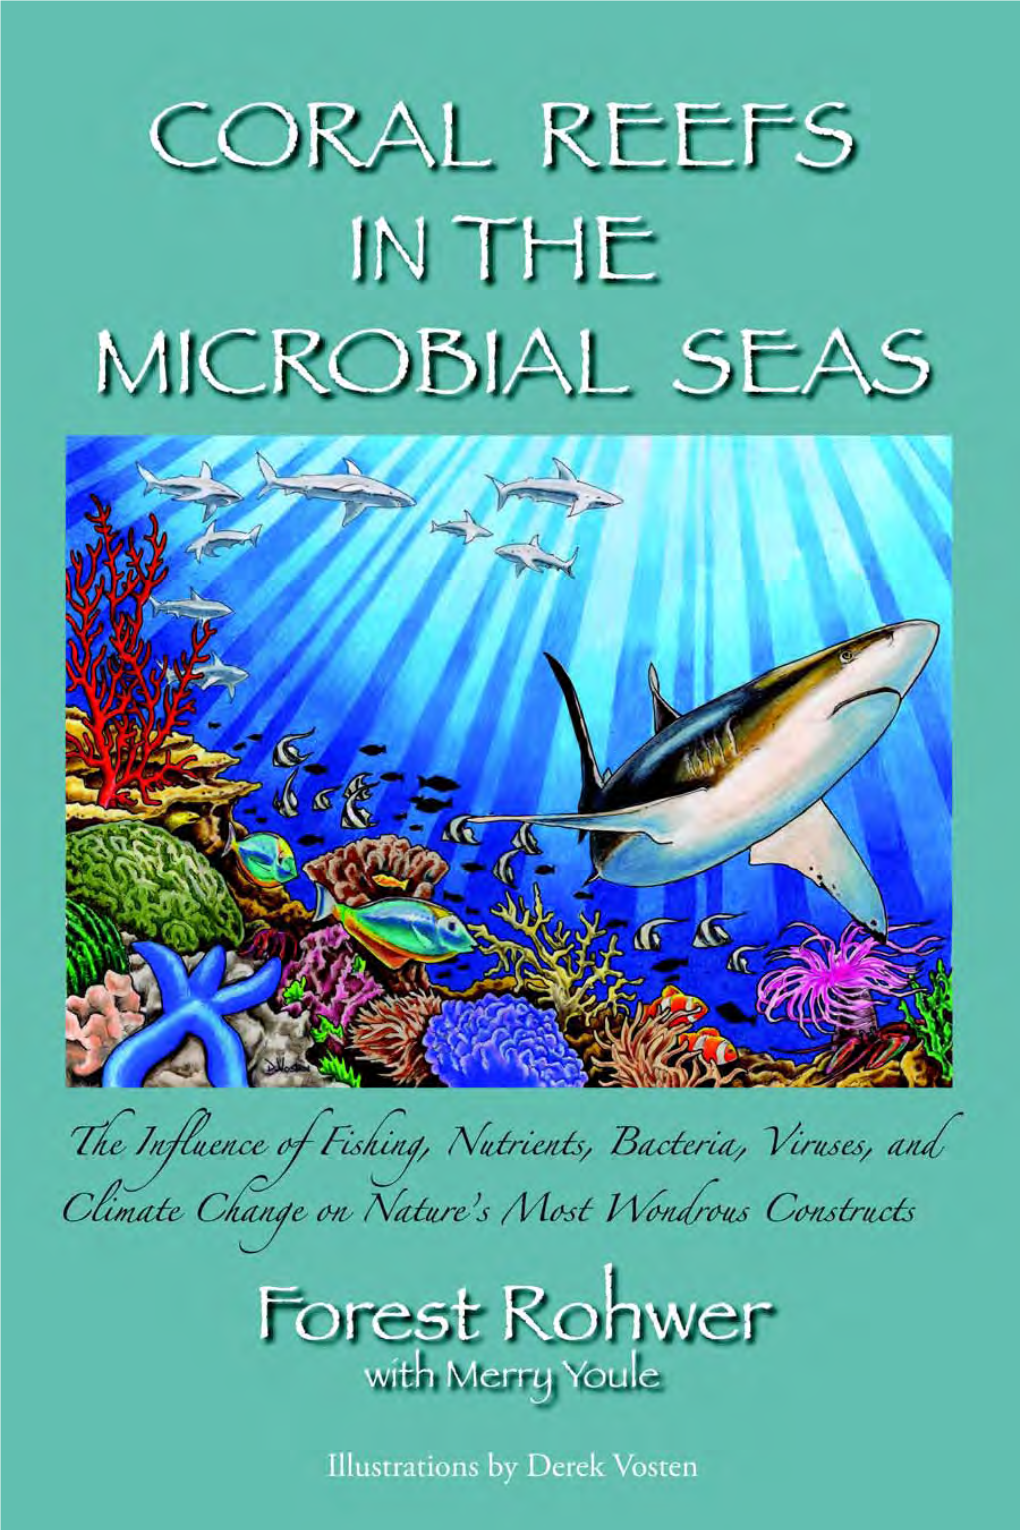 Coral Reefs in the Microbial Seas